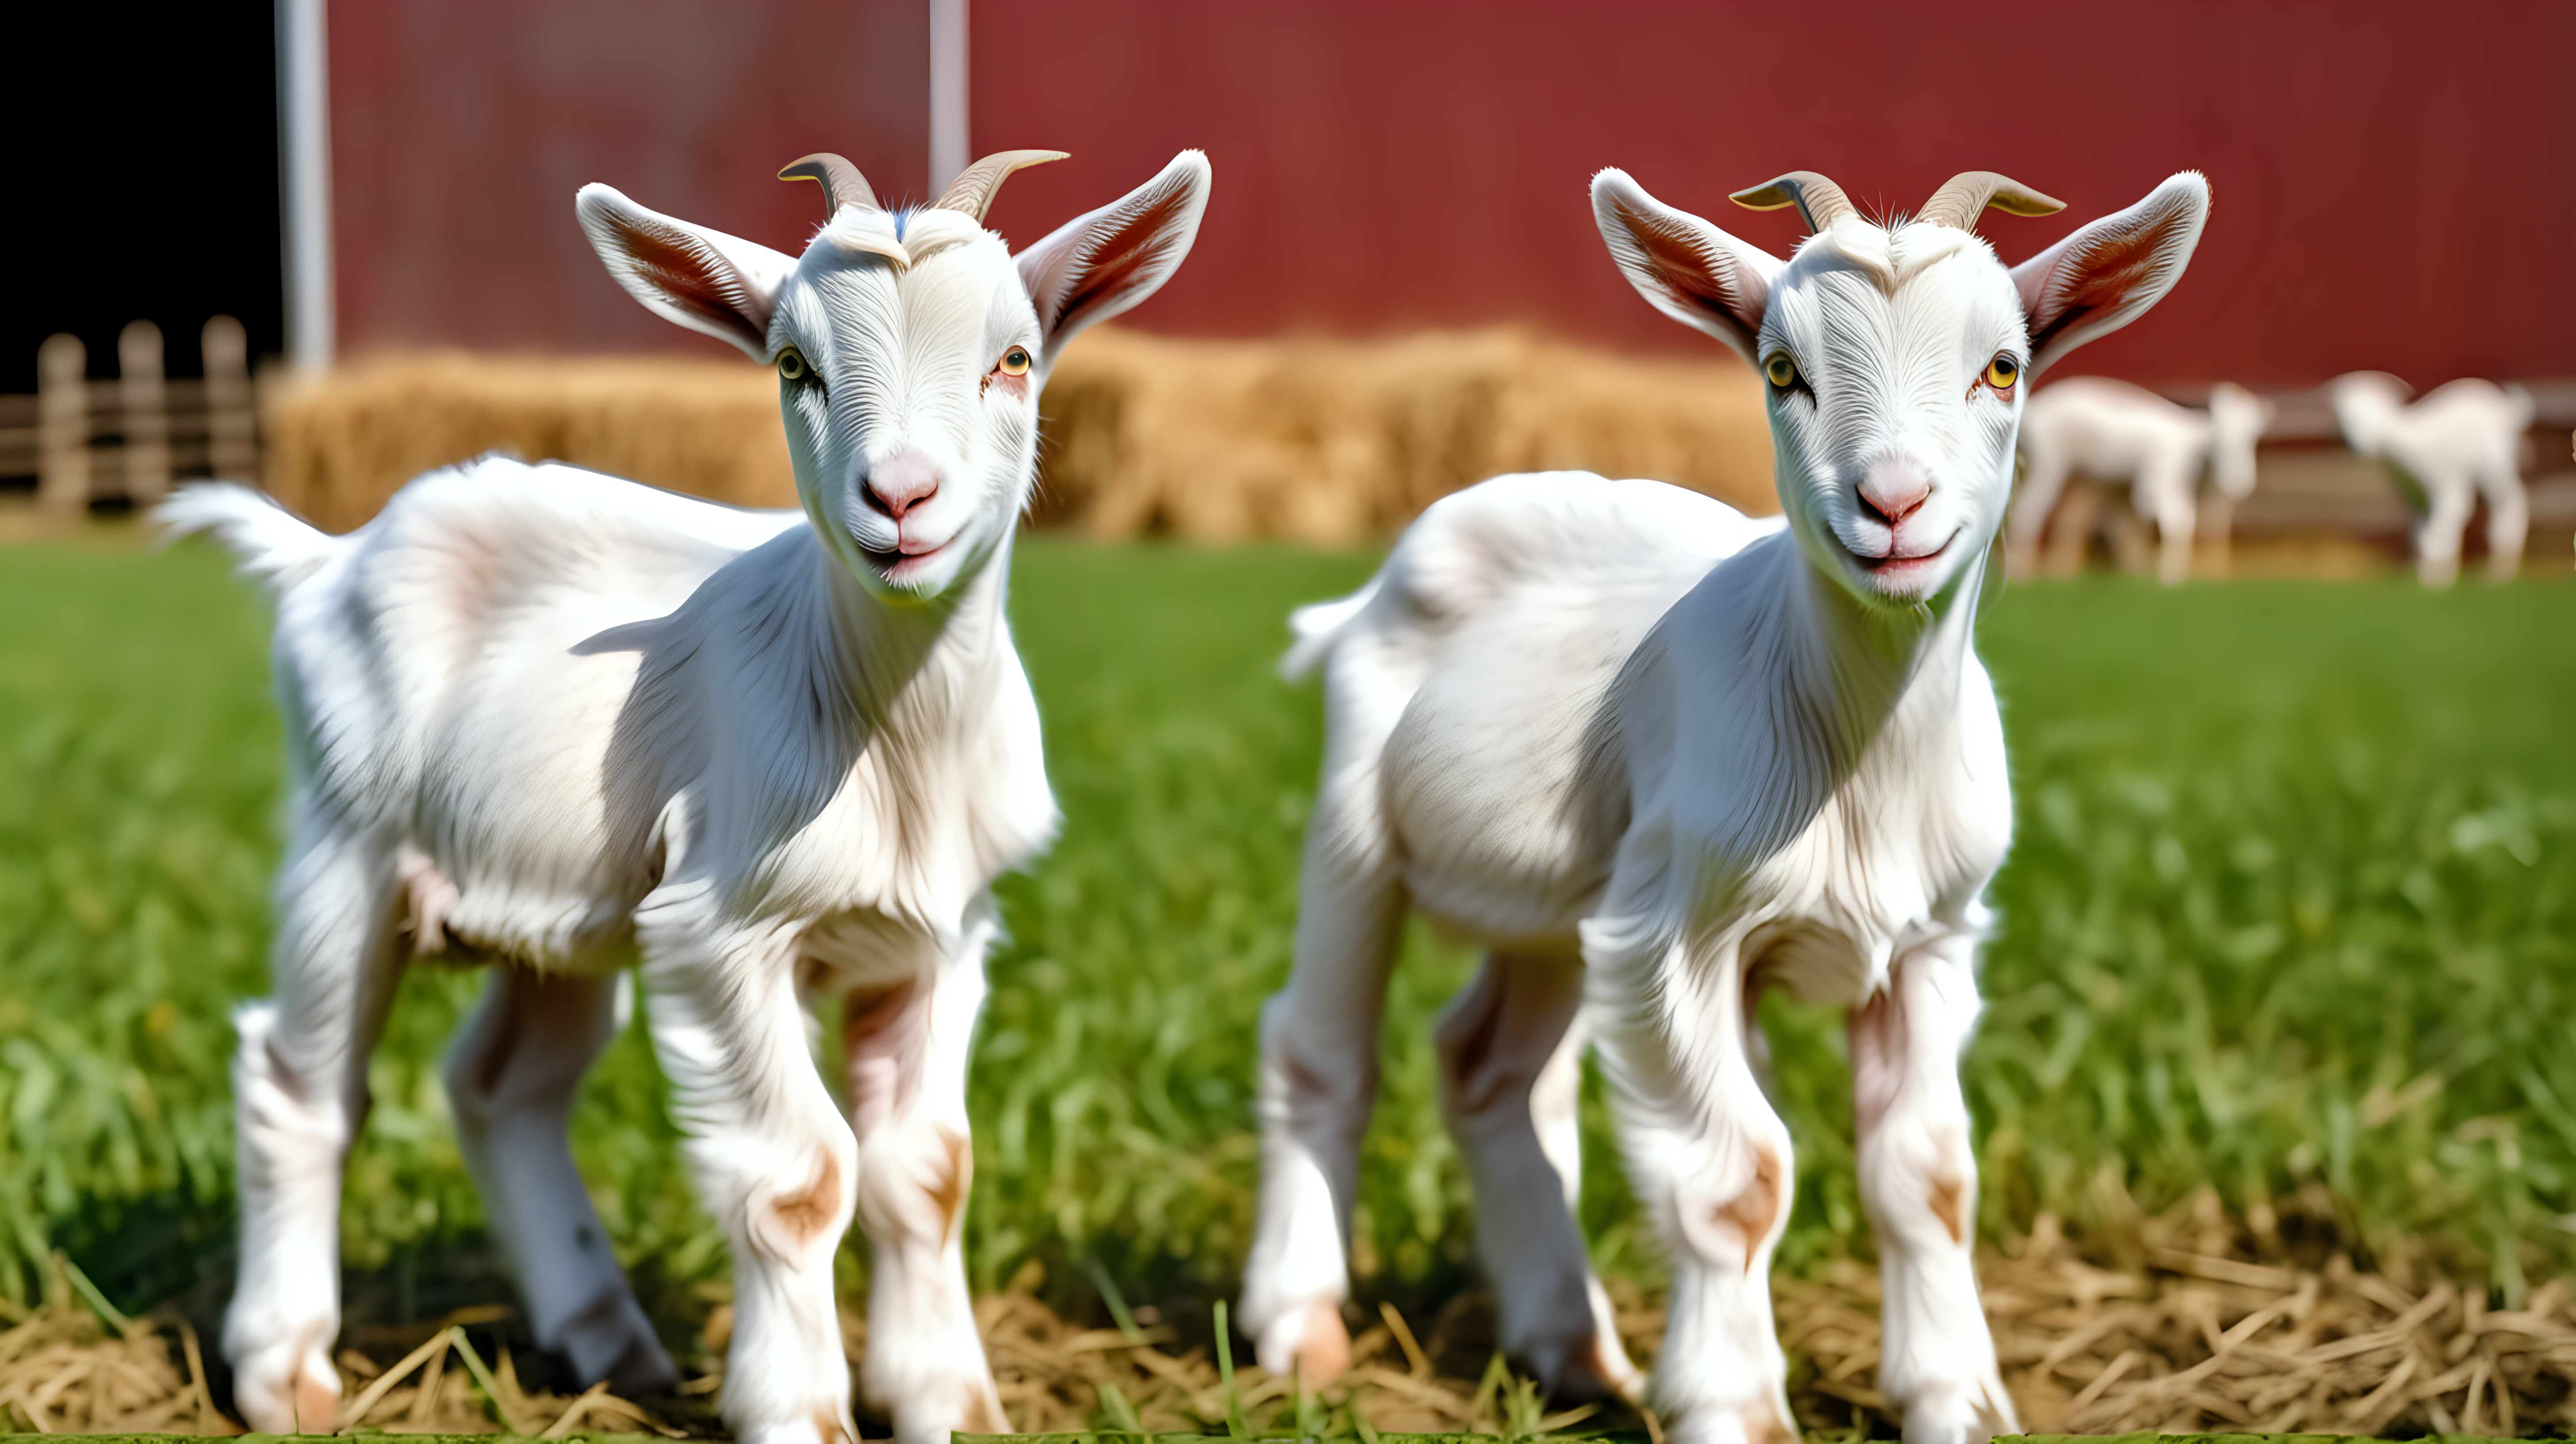 two baby goat in feild, farm barn background, isolated on background